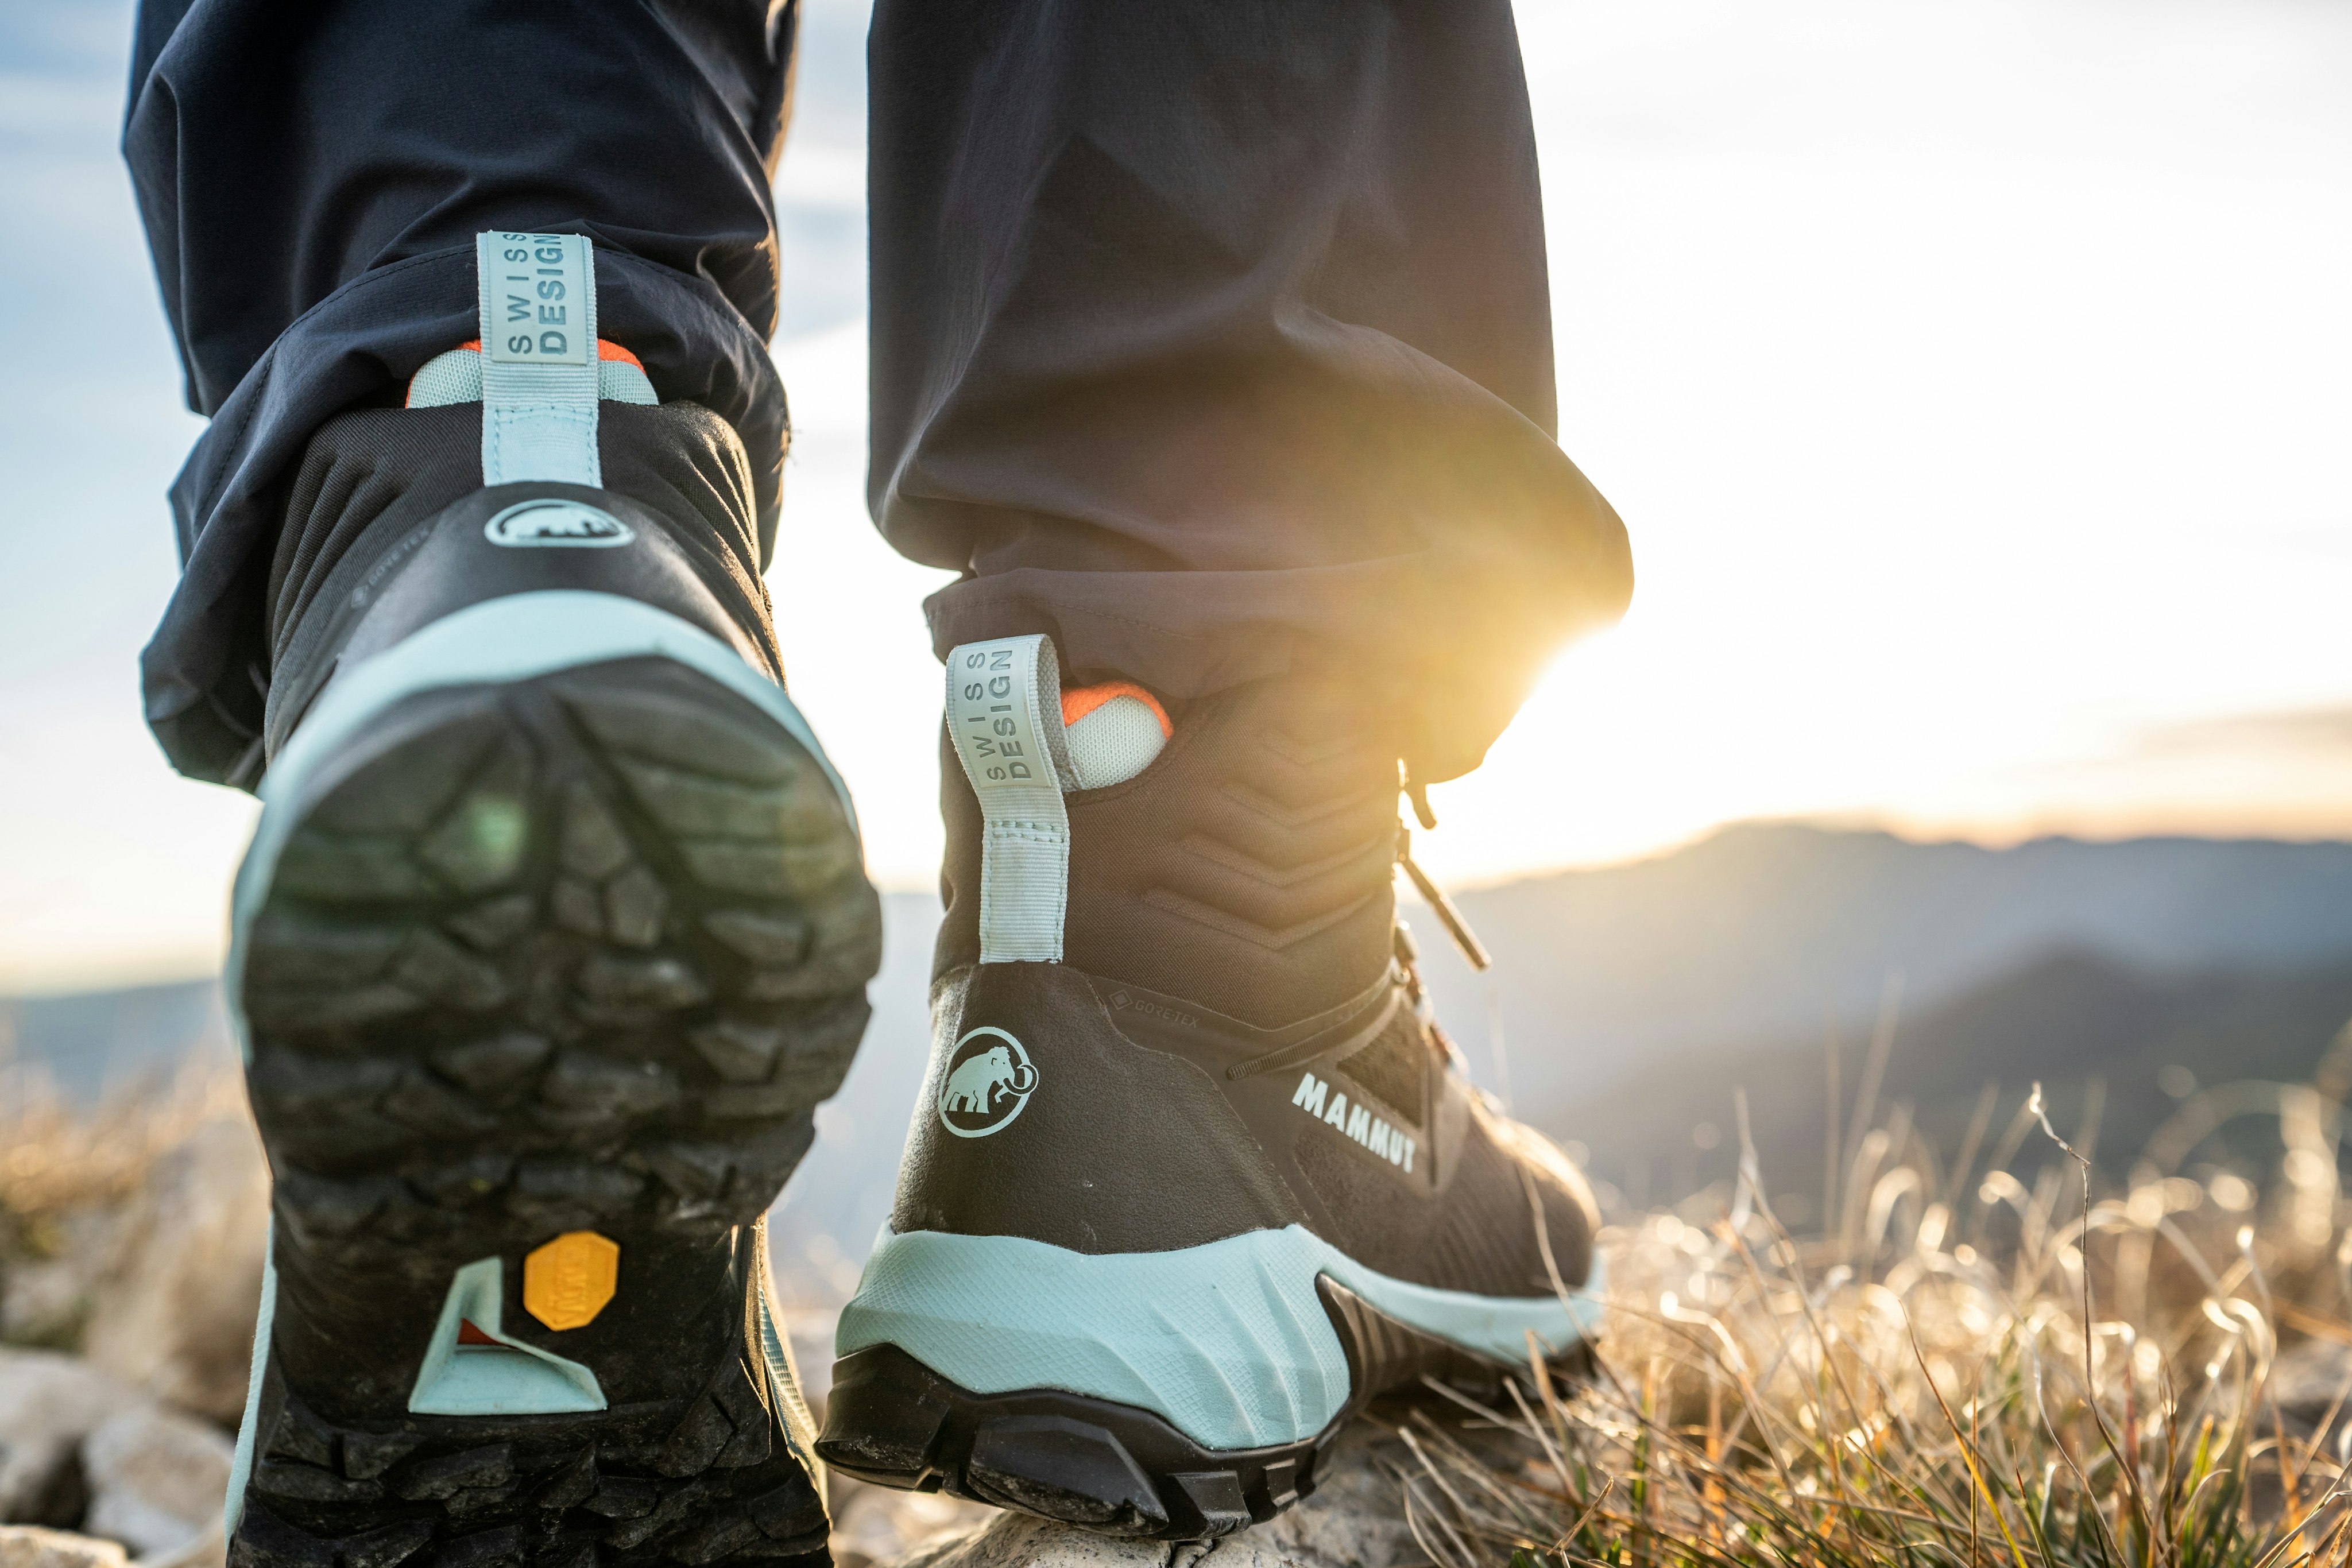 Mammut shoes with a mountain panorama.